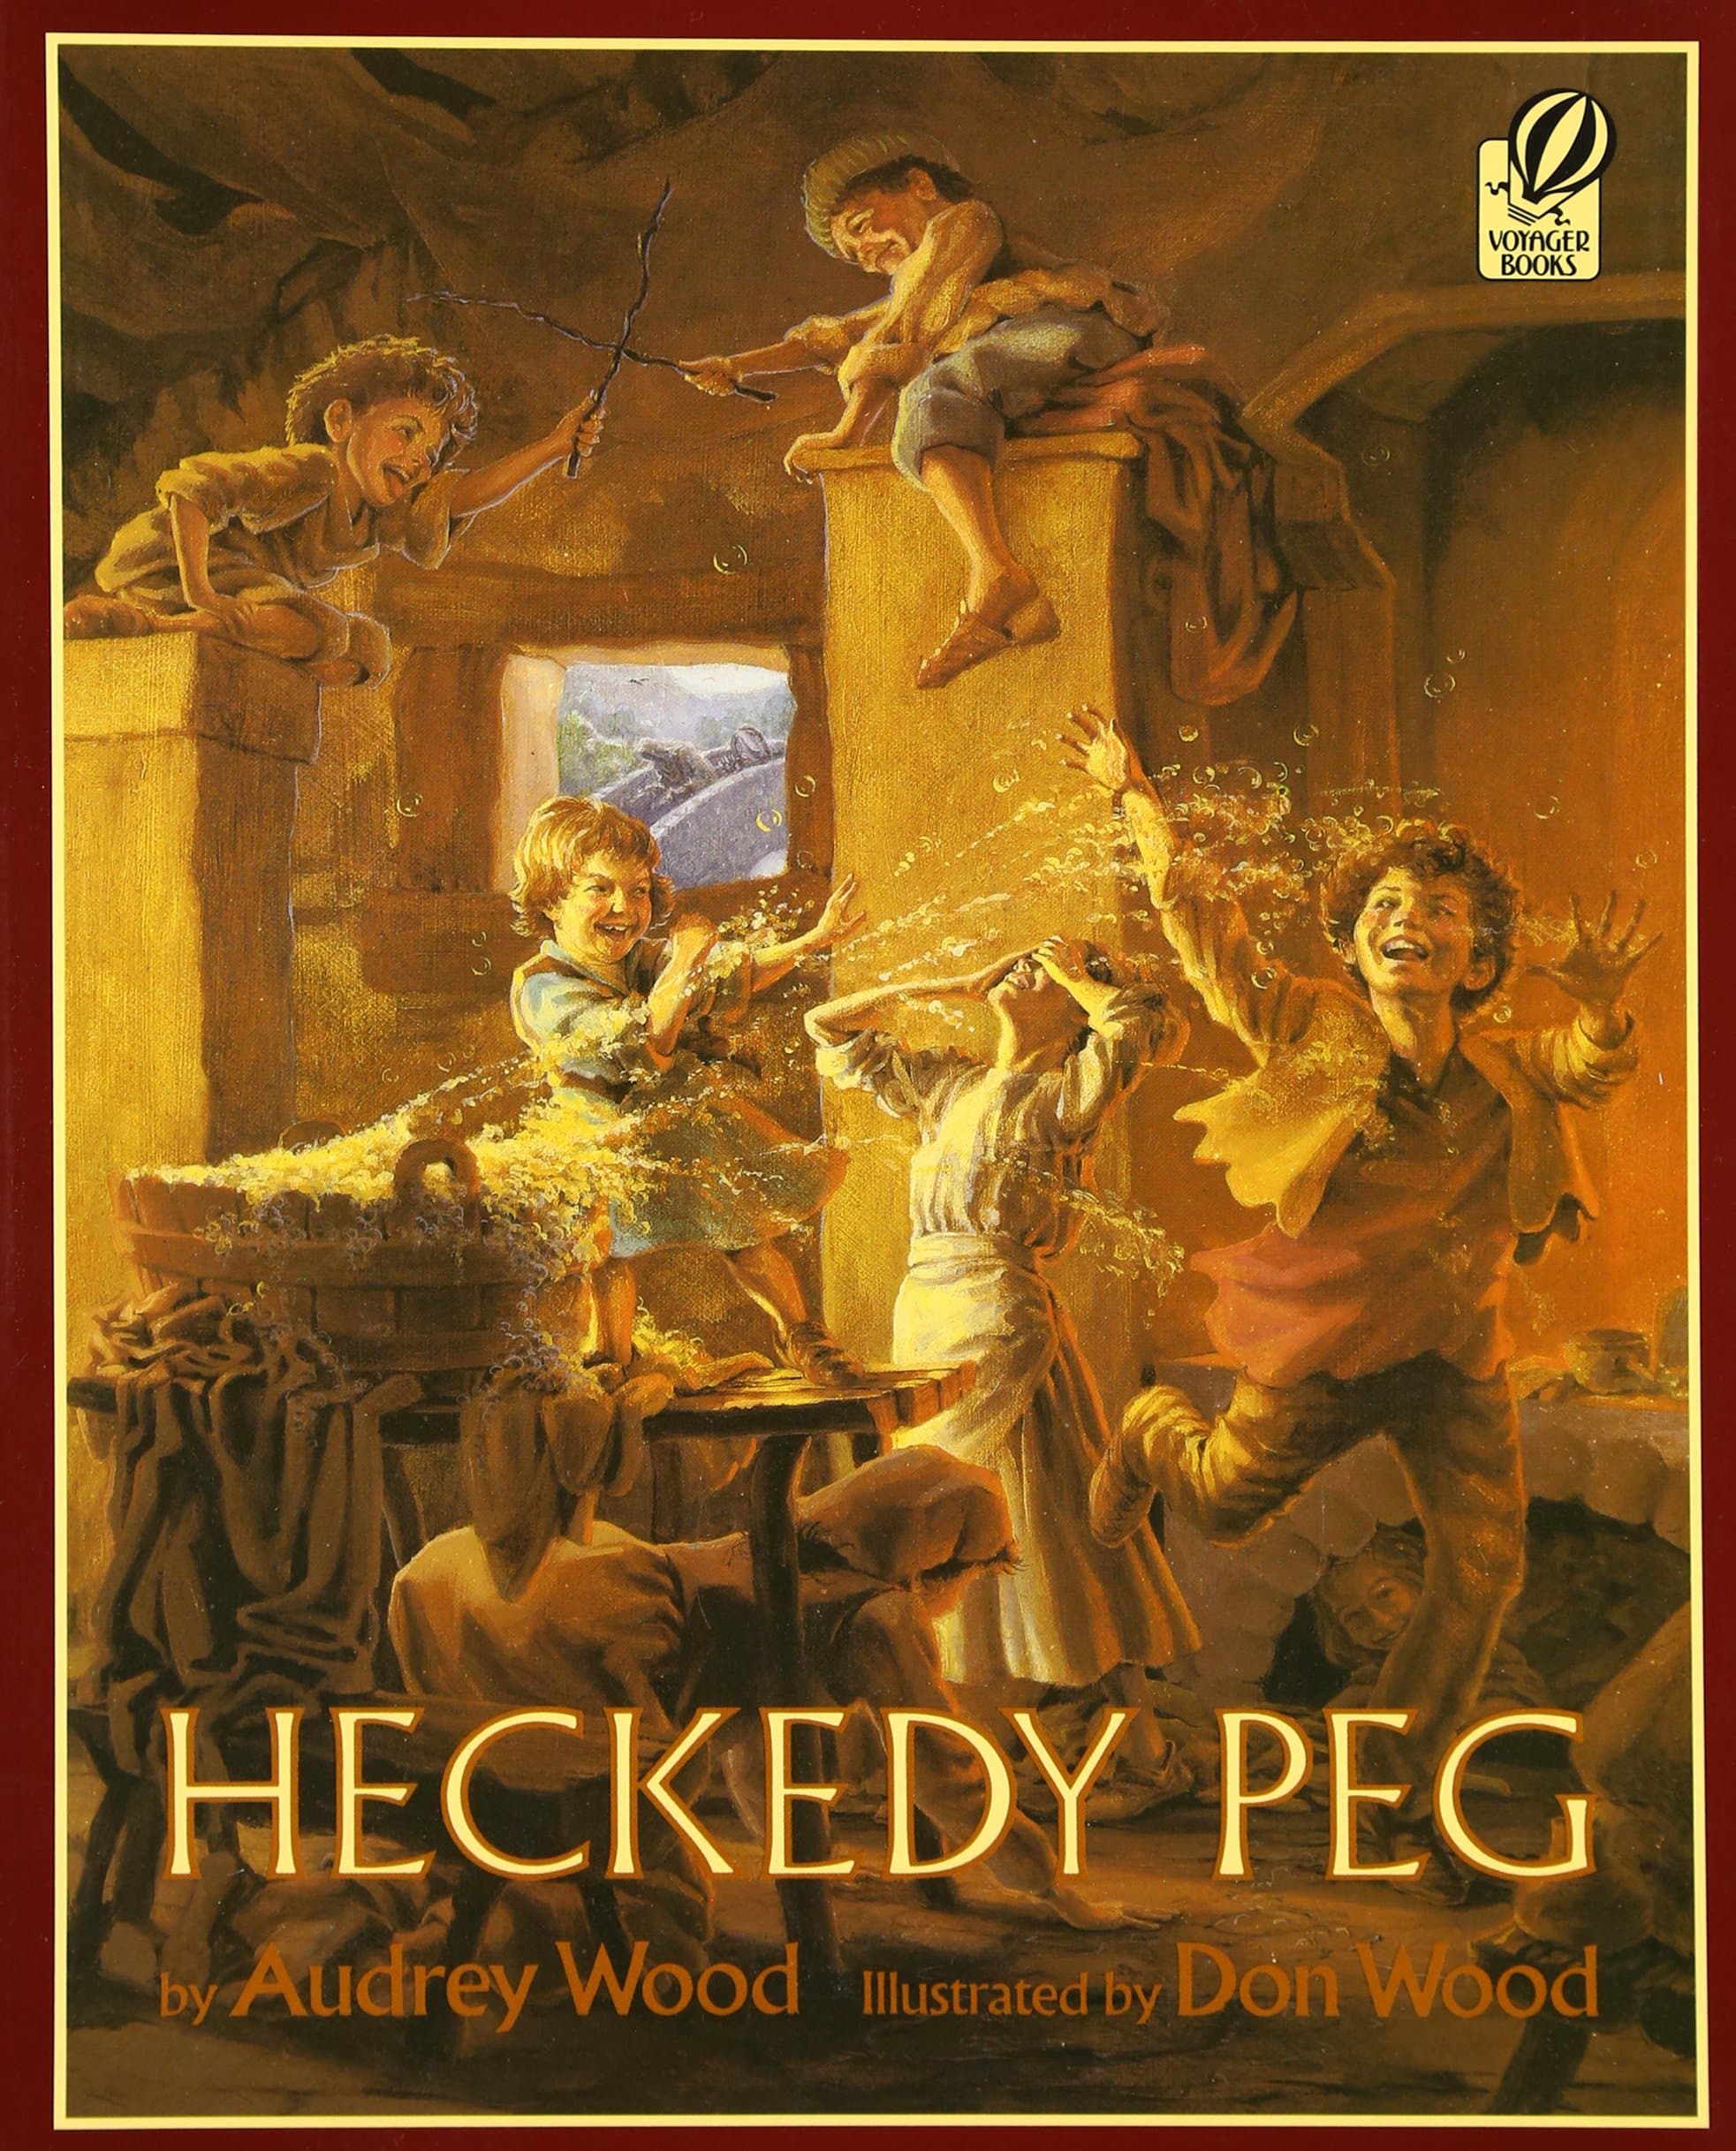 The cover for the book Heckedy Peg